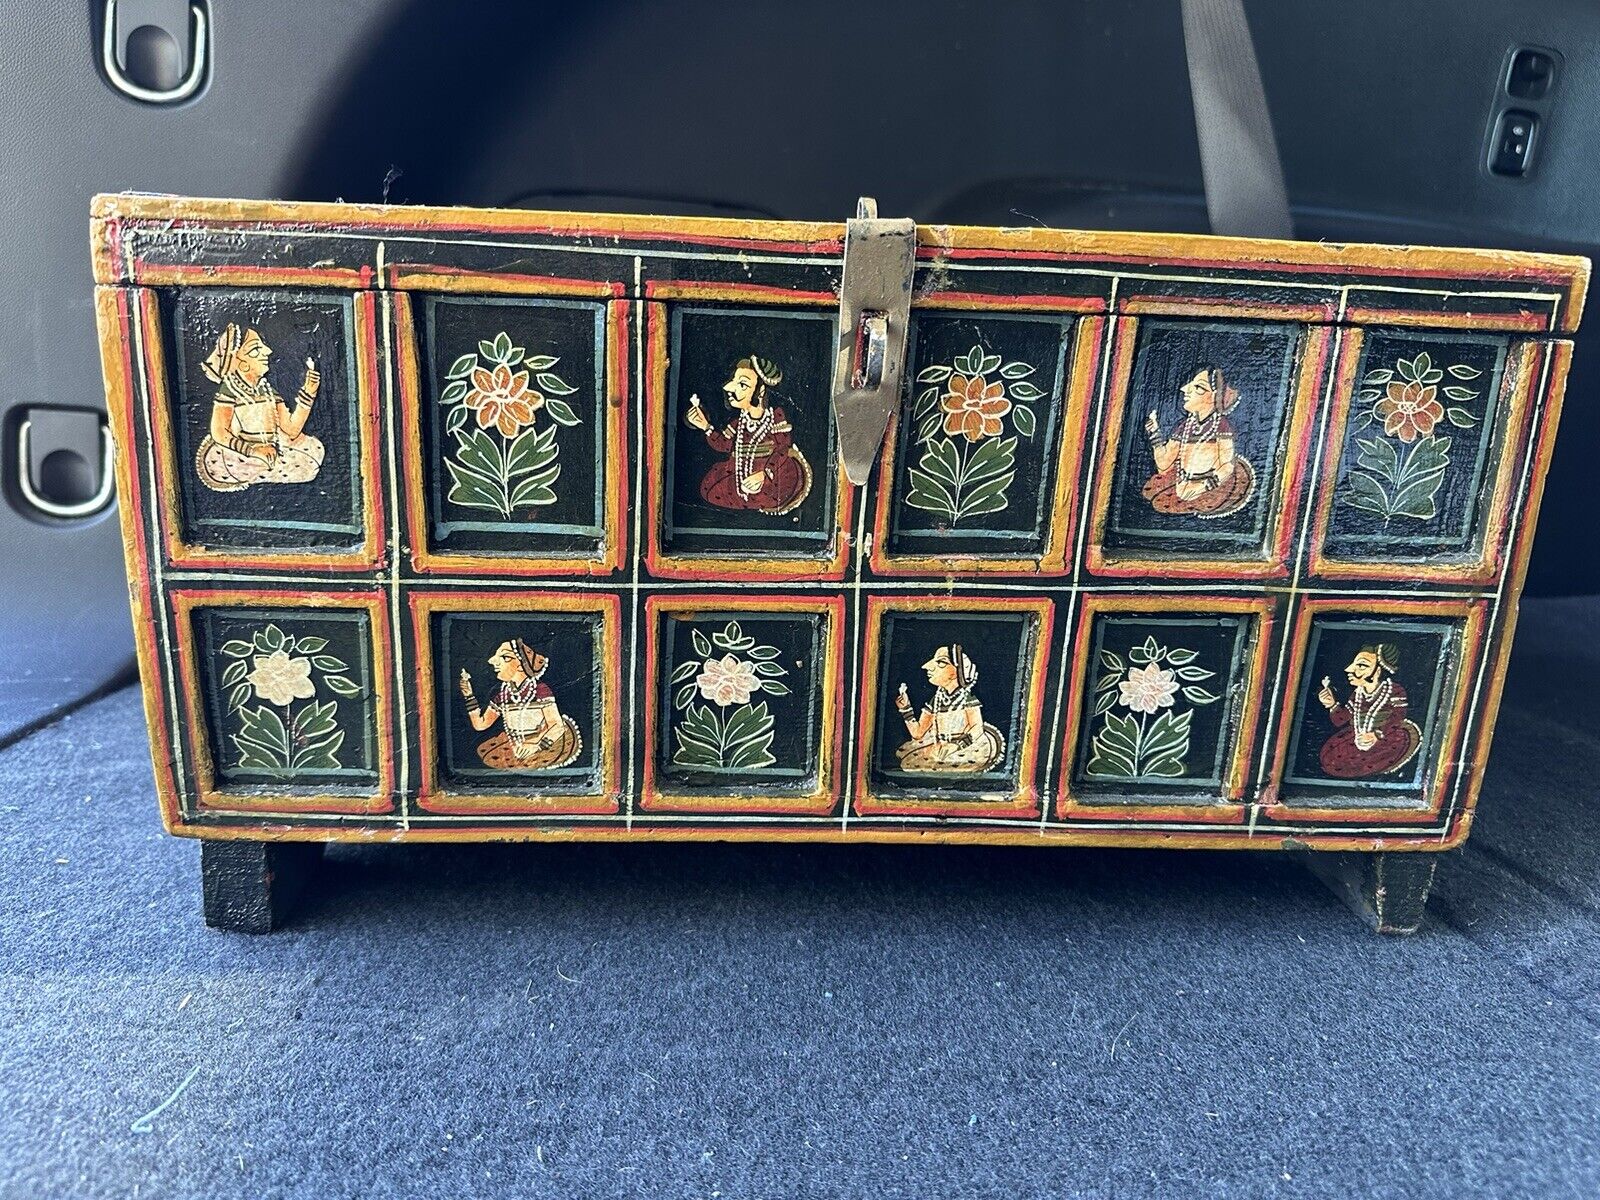 Antique Indian Mughal Polychrome Wood Panel Wedding Box Chest